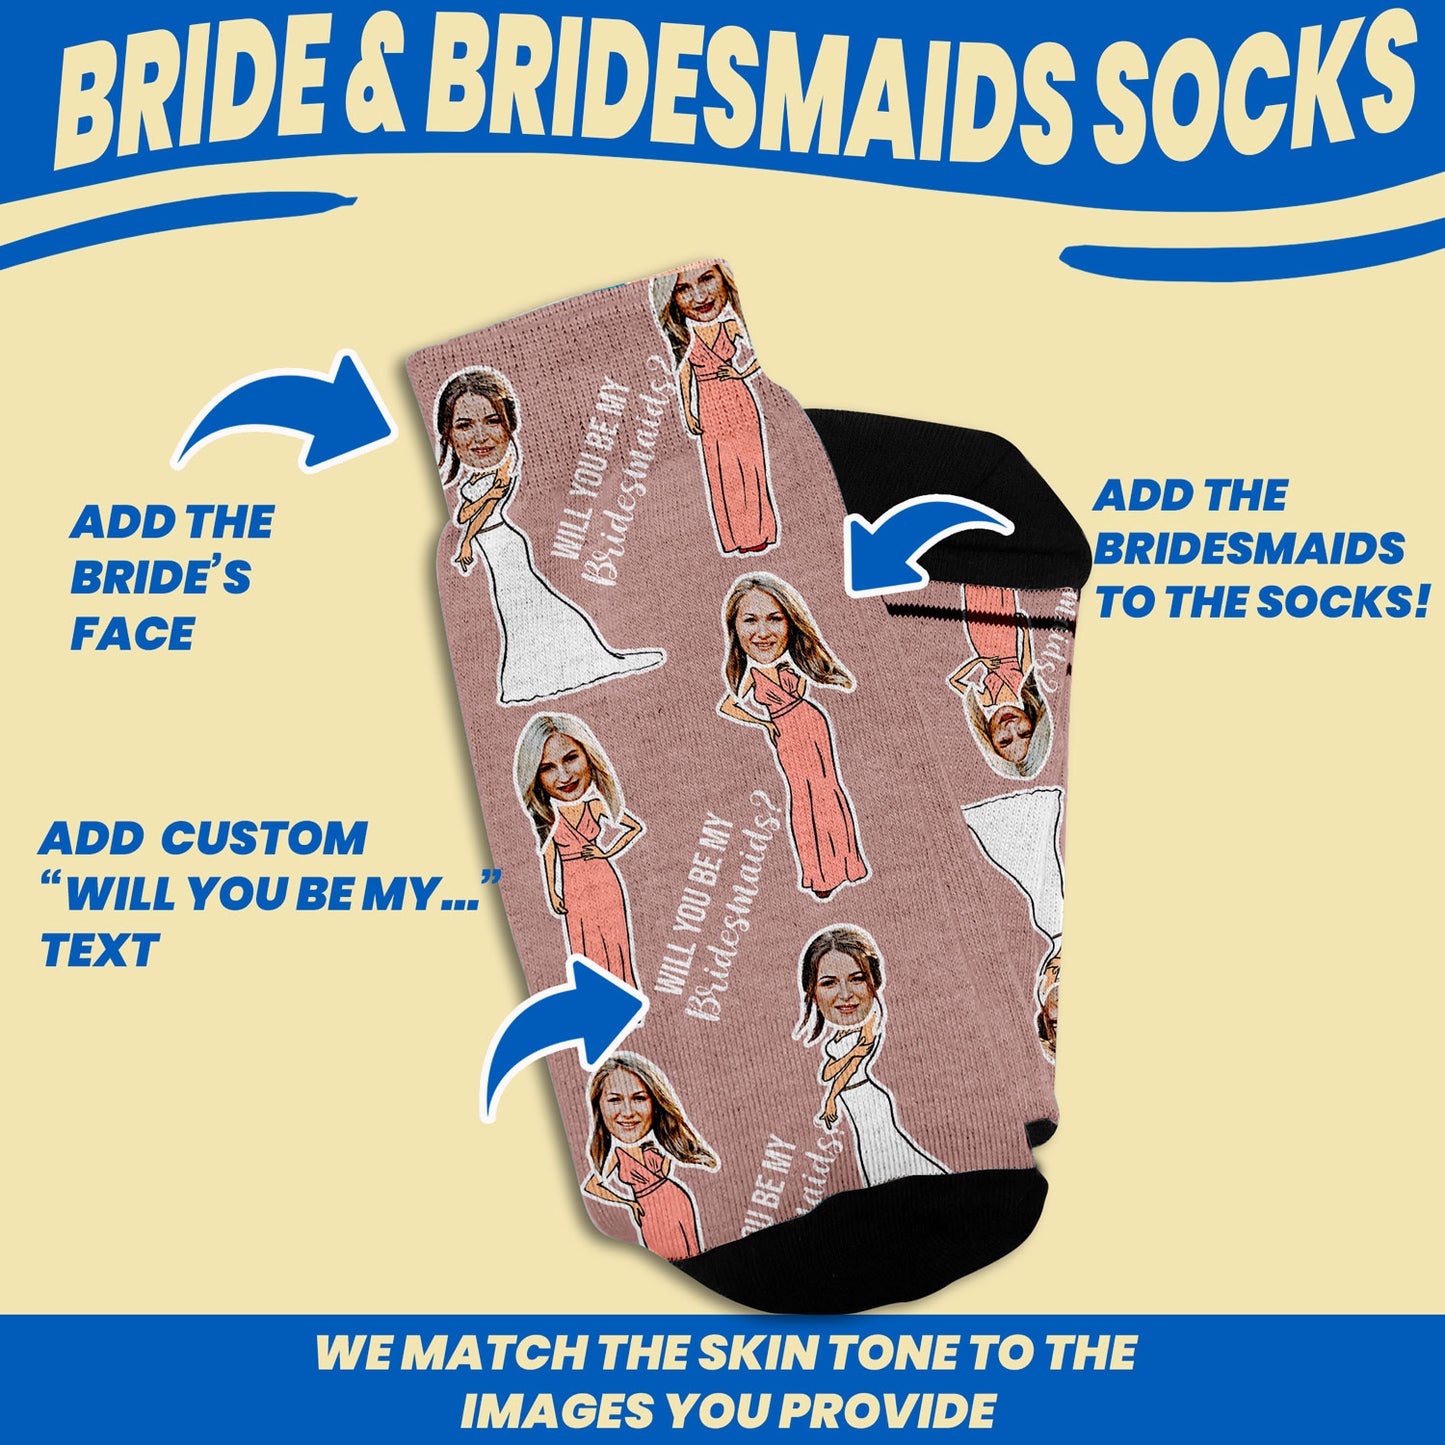 will you be my bridesmaids gift socks personalized with faces design features such as adding the bride and bridesmaids to the socks